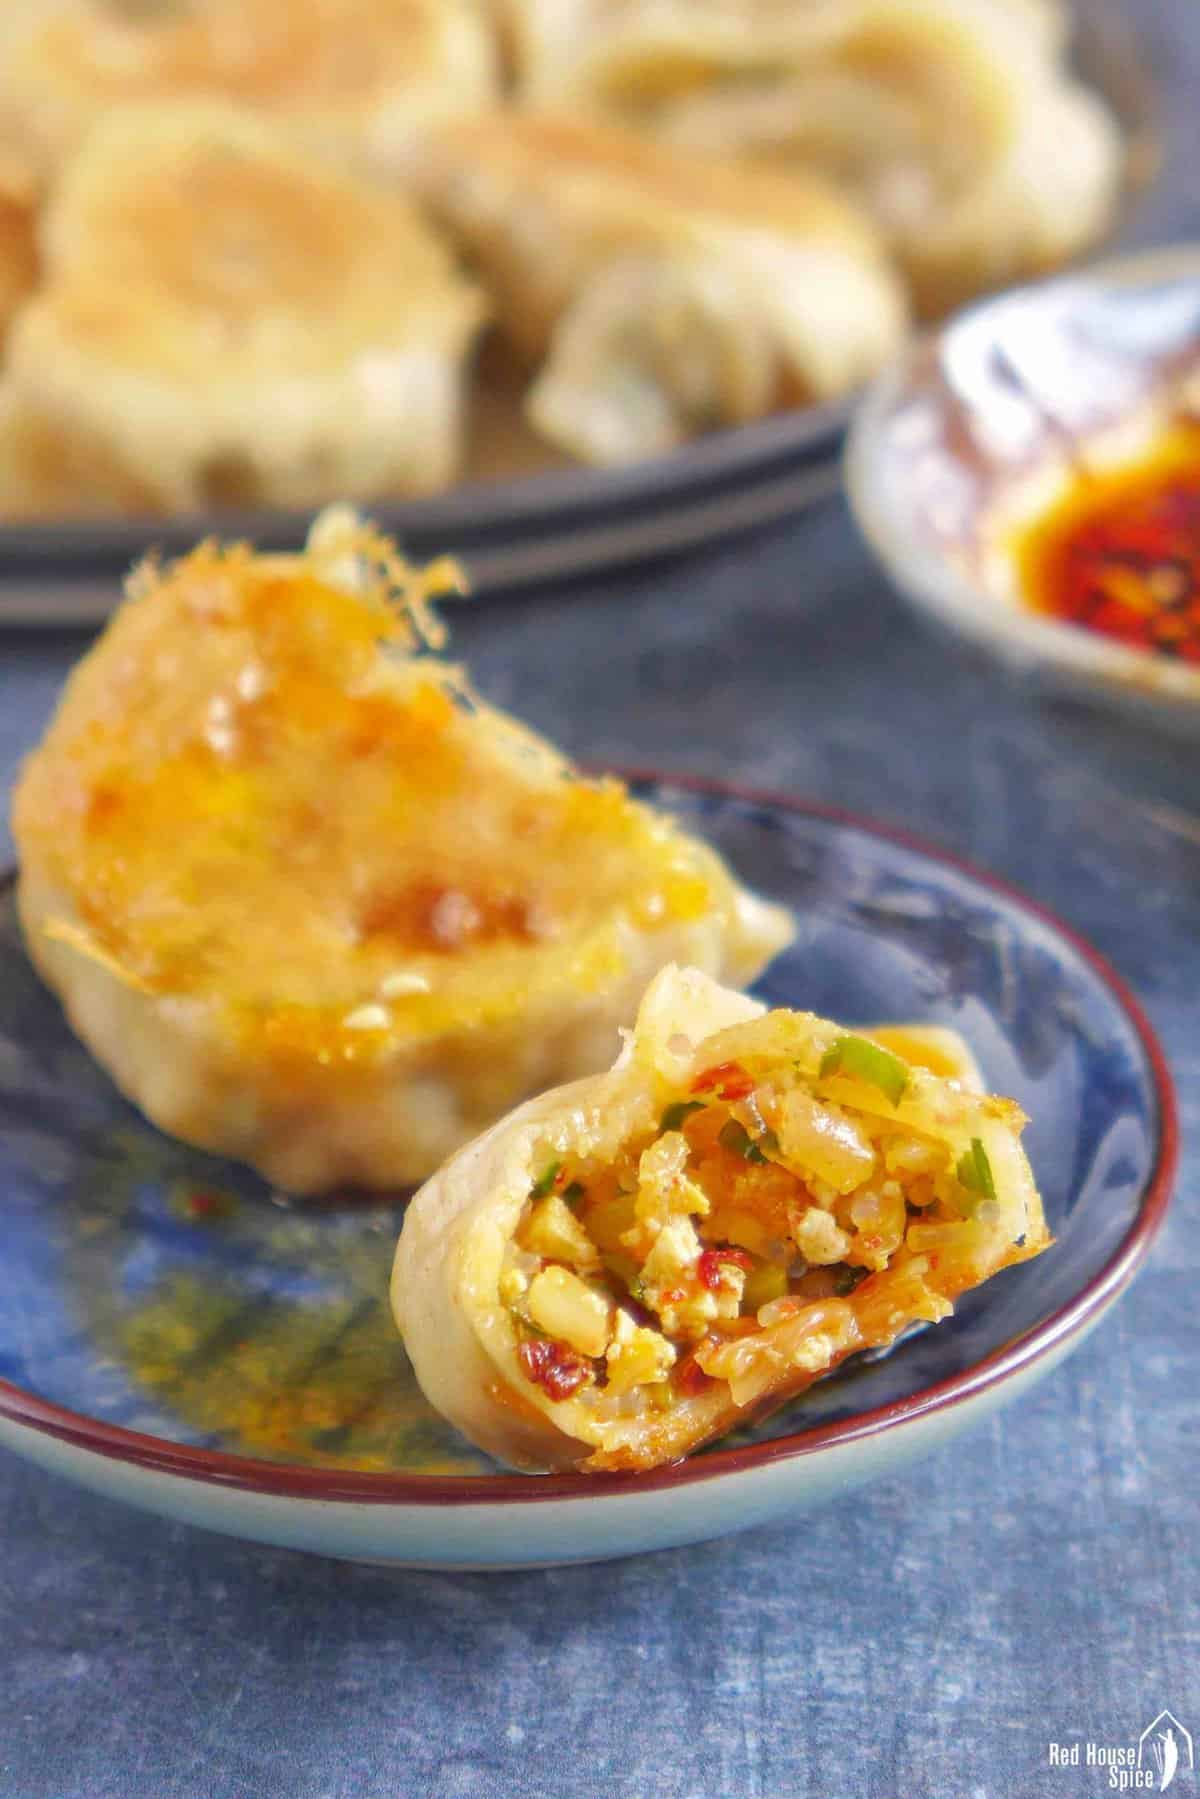 an open dumpling showing its kimchi filling with other ingredients.